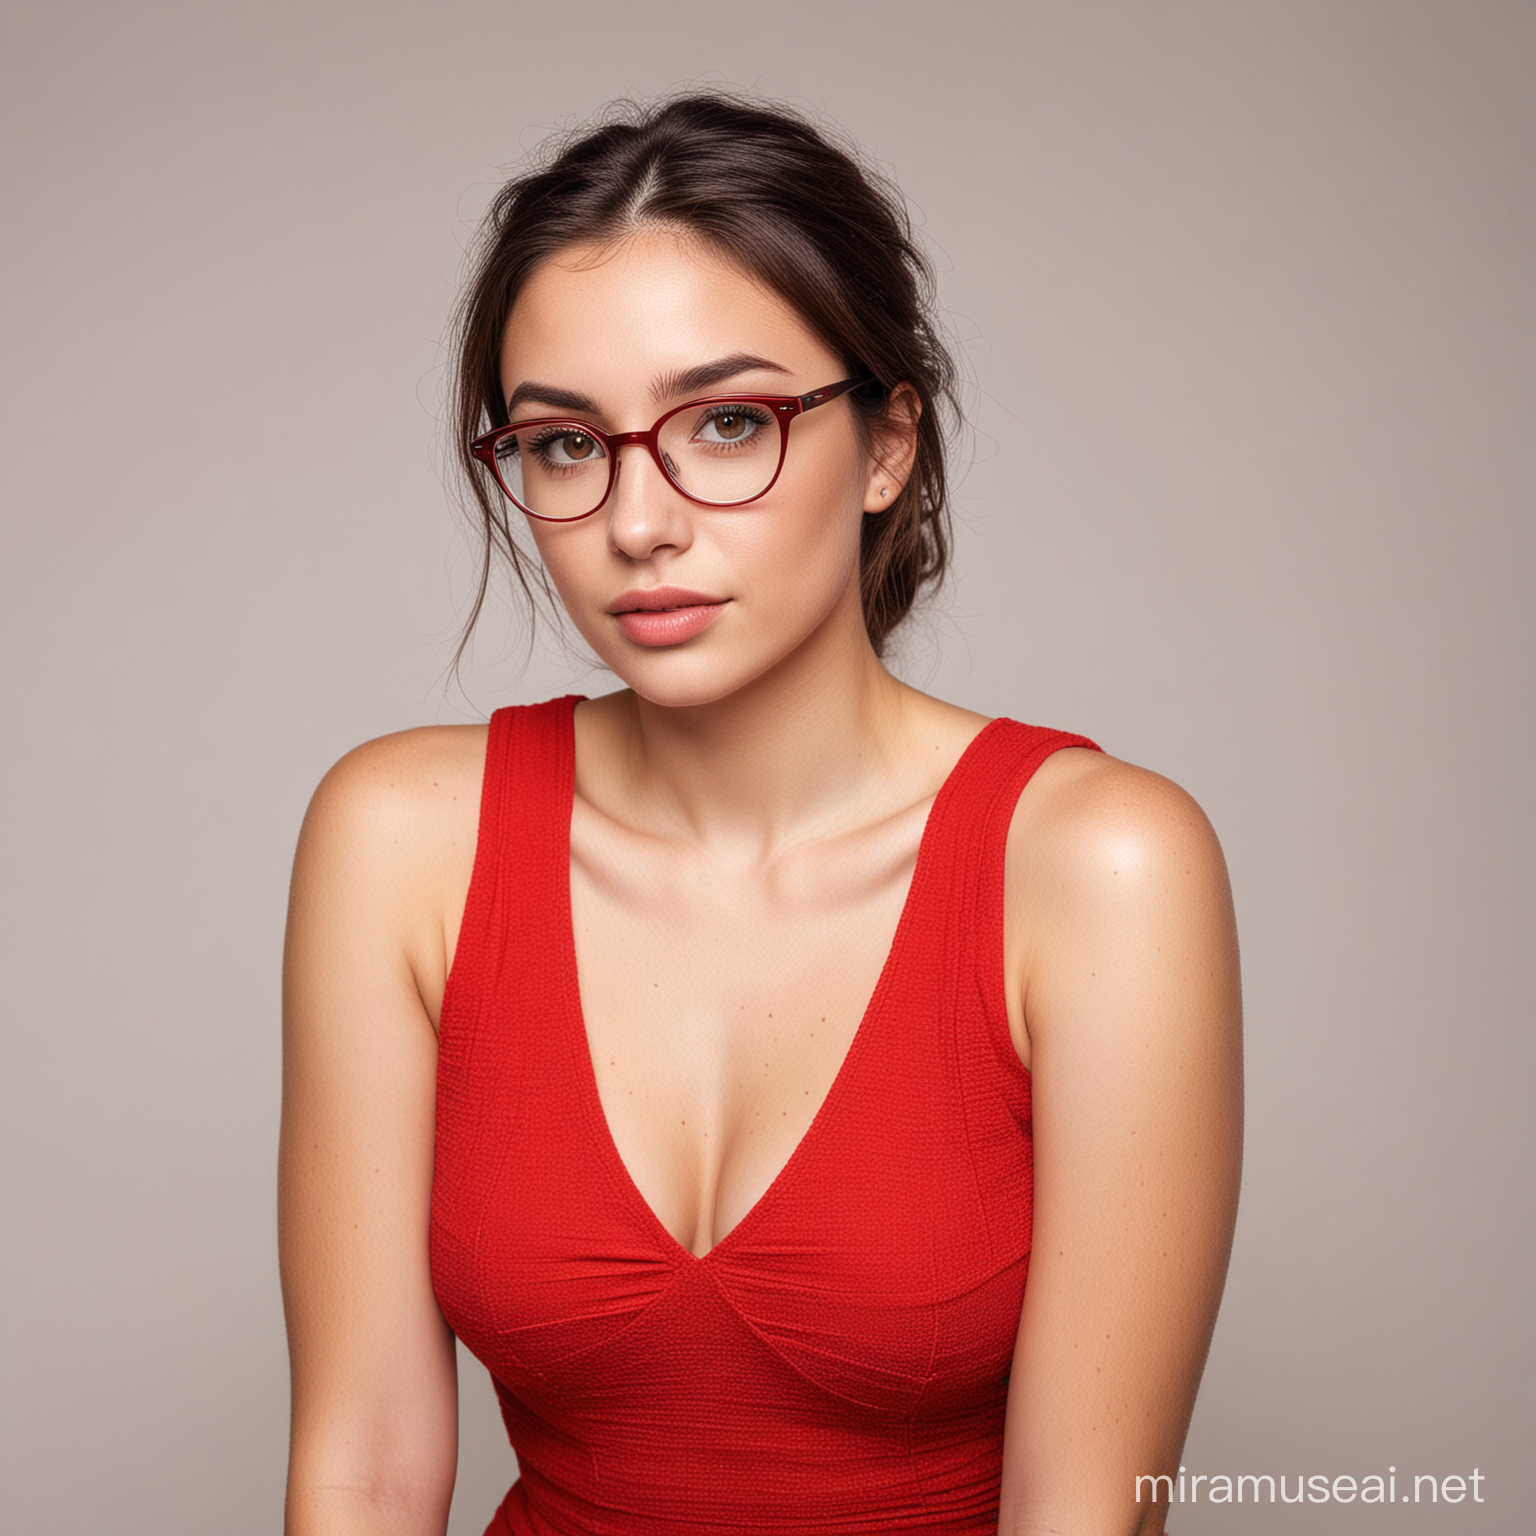 Stylish Young Woman in Red Dress with Glasses on White Background